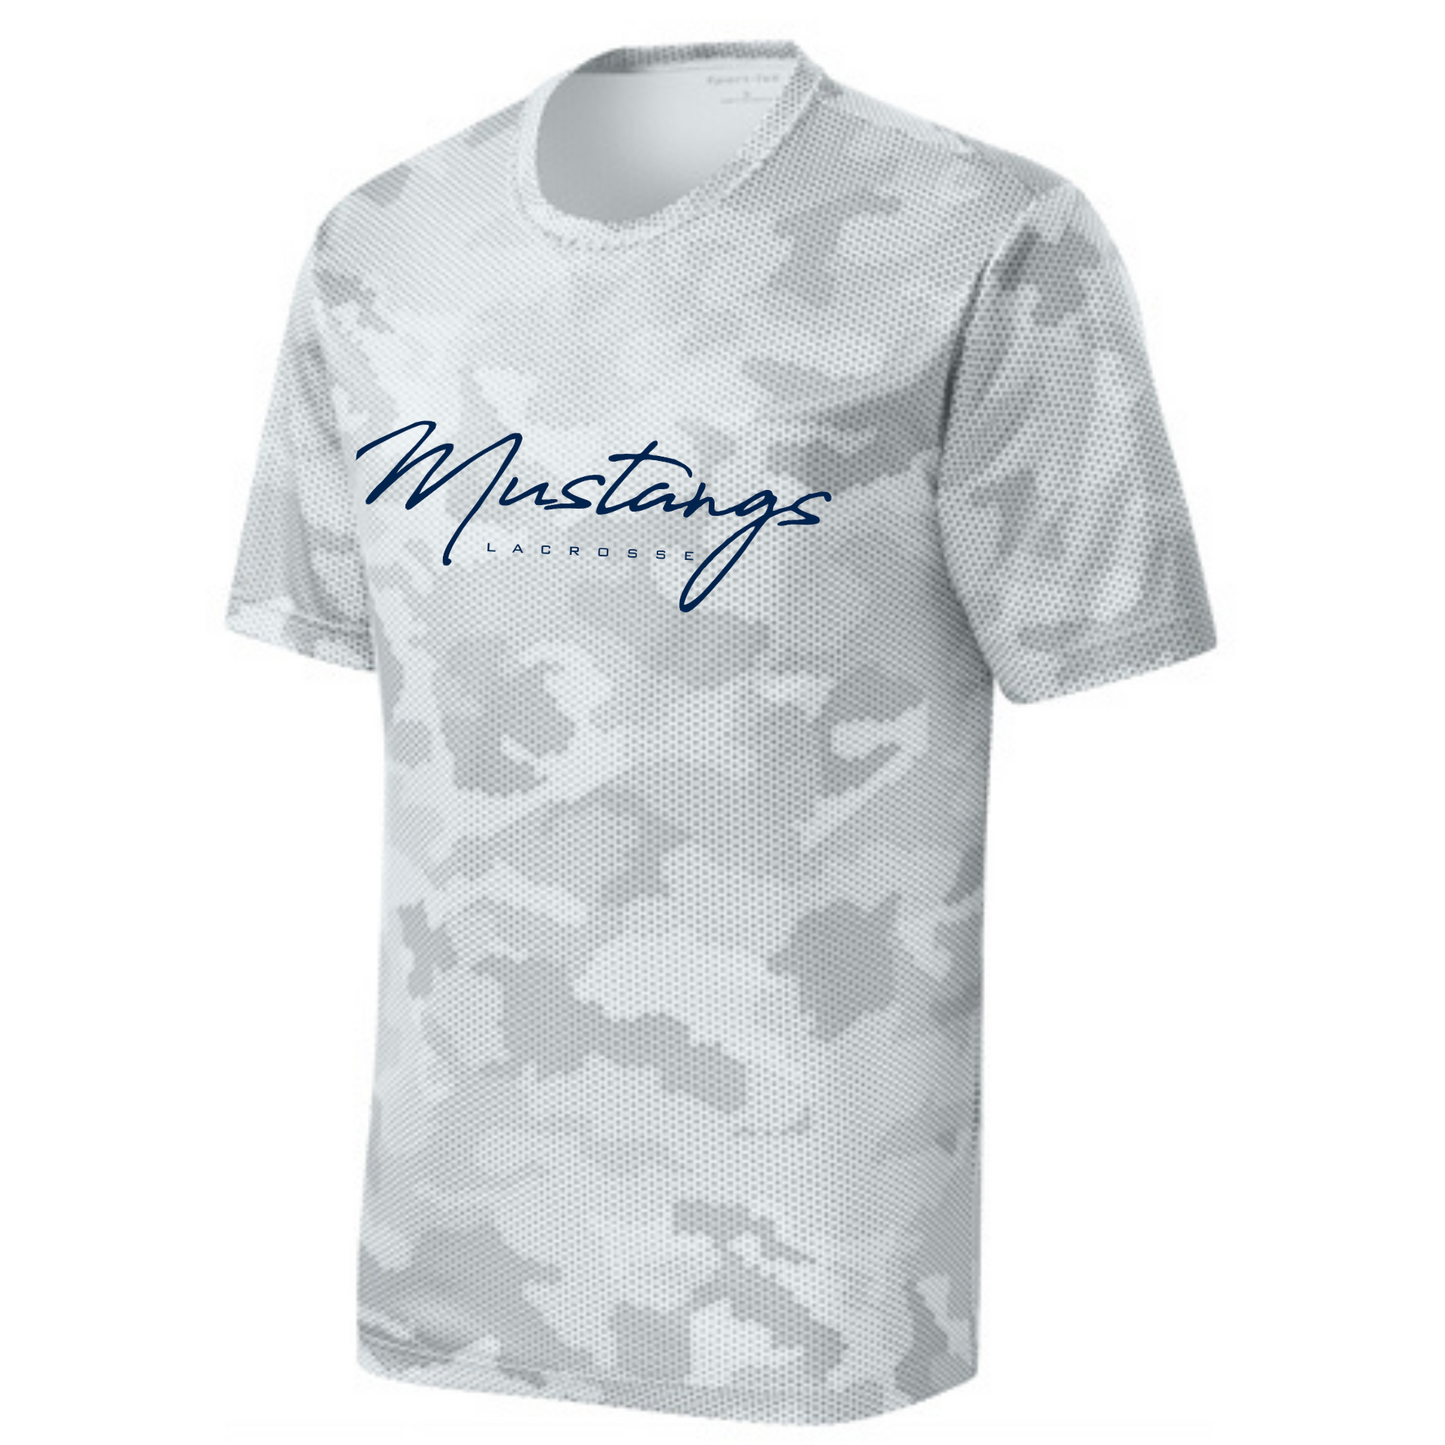 MEDWAY YOUTH LACROSSE MUSTANGS SPORT-TEK CAMOHEX ADULT TEE - WHITE